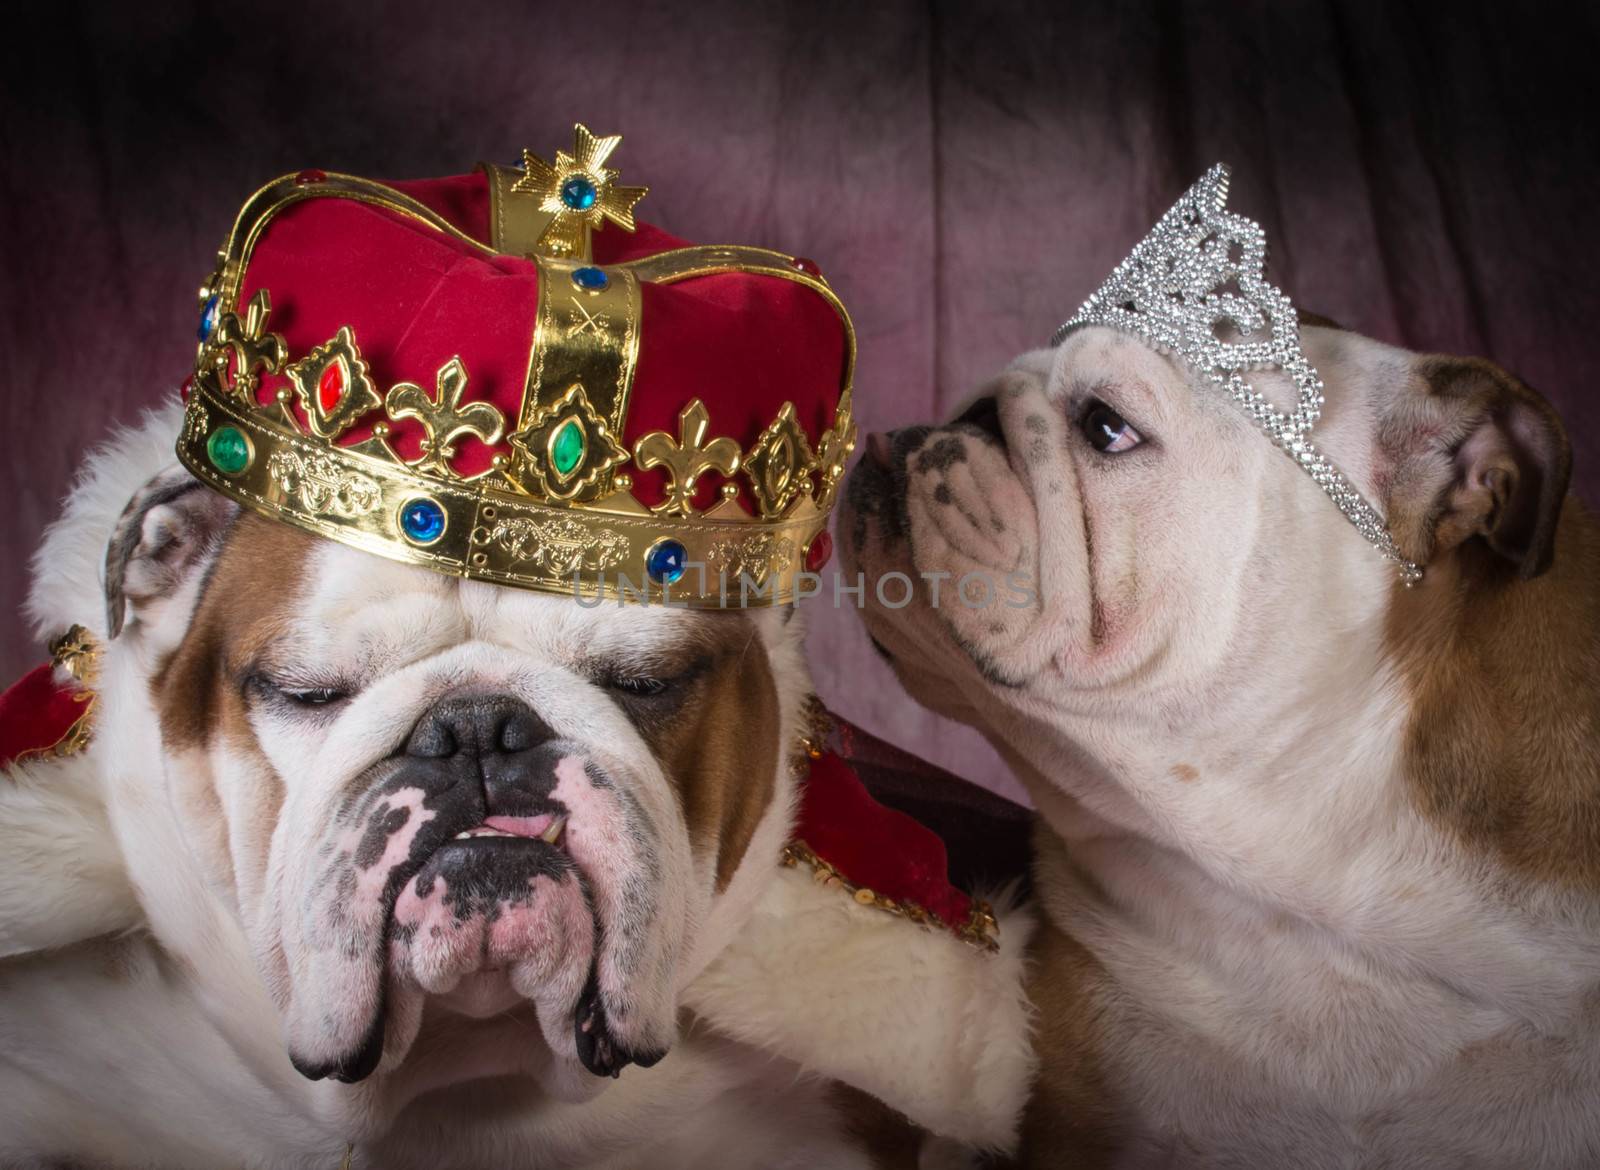 royal couple - two english bulldogs dressed up like a king and queen